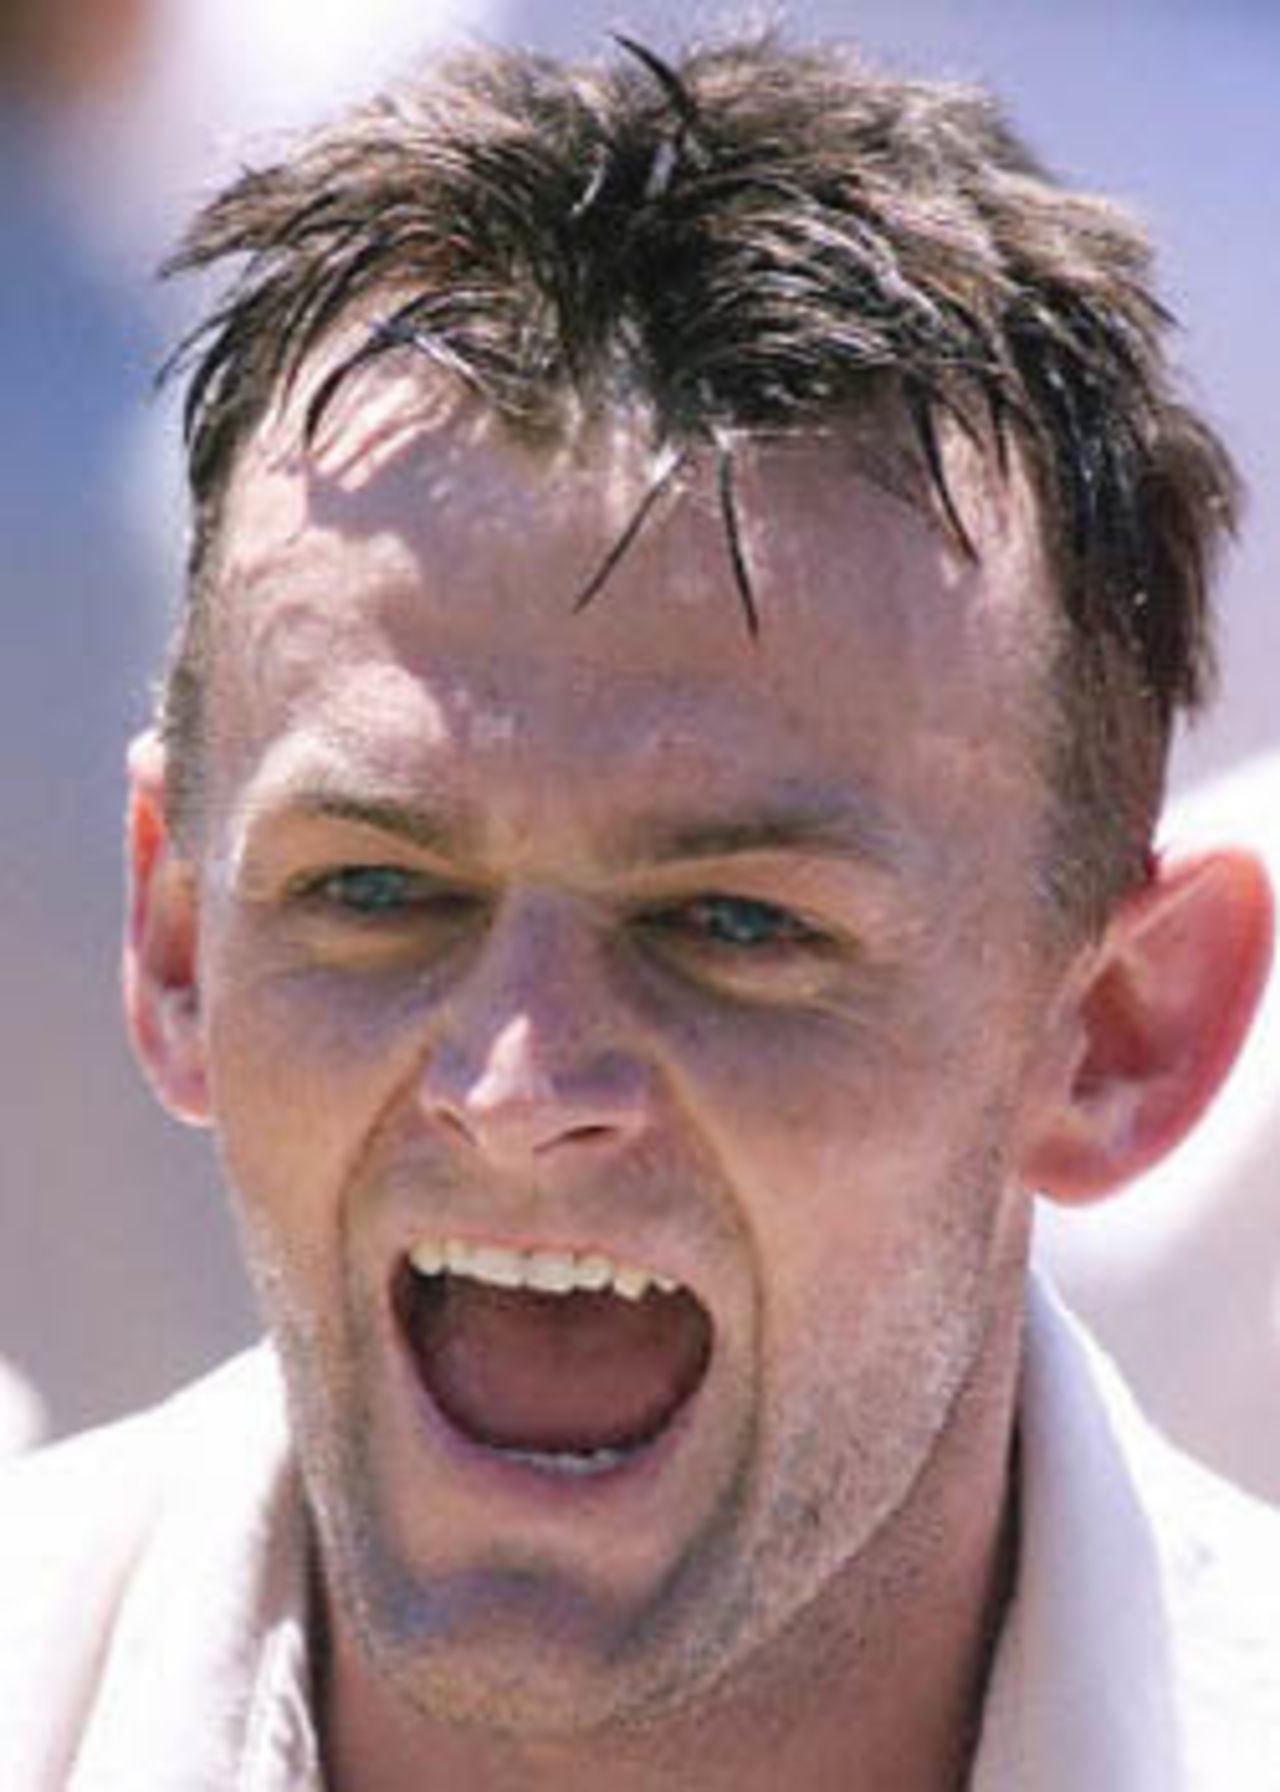 Australian test cricket captain Adam Gilchrist shouts in triumph as he leaves the field after leading his side to a five wicket win against the West Indies in the third test at the Adelaide Oval, 19 December 2000. The win is the first for stand-in captain Gilchrist who replaced the injured Steve Waugh for this match, and extends Australia's world record unbeaten run to 13.